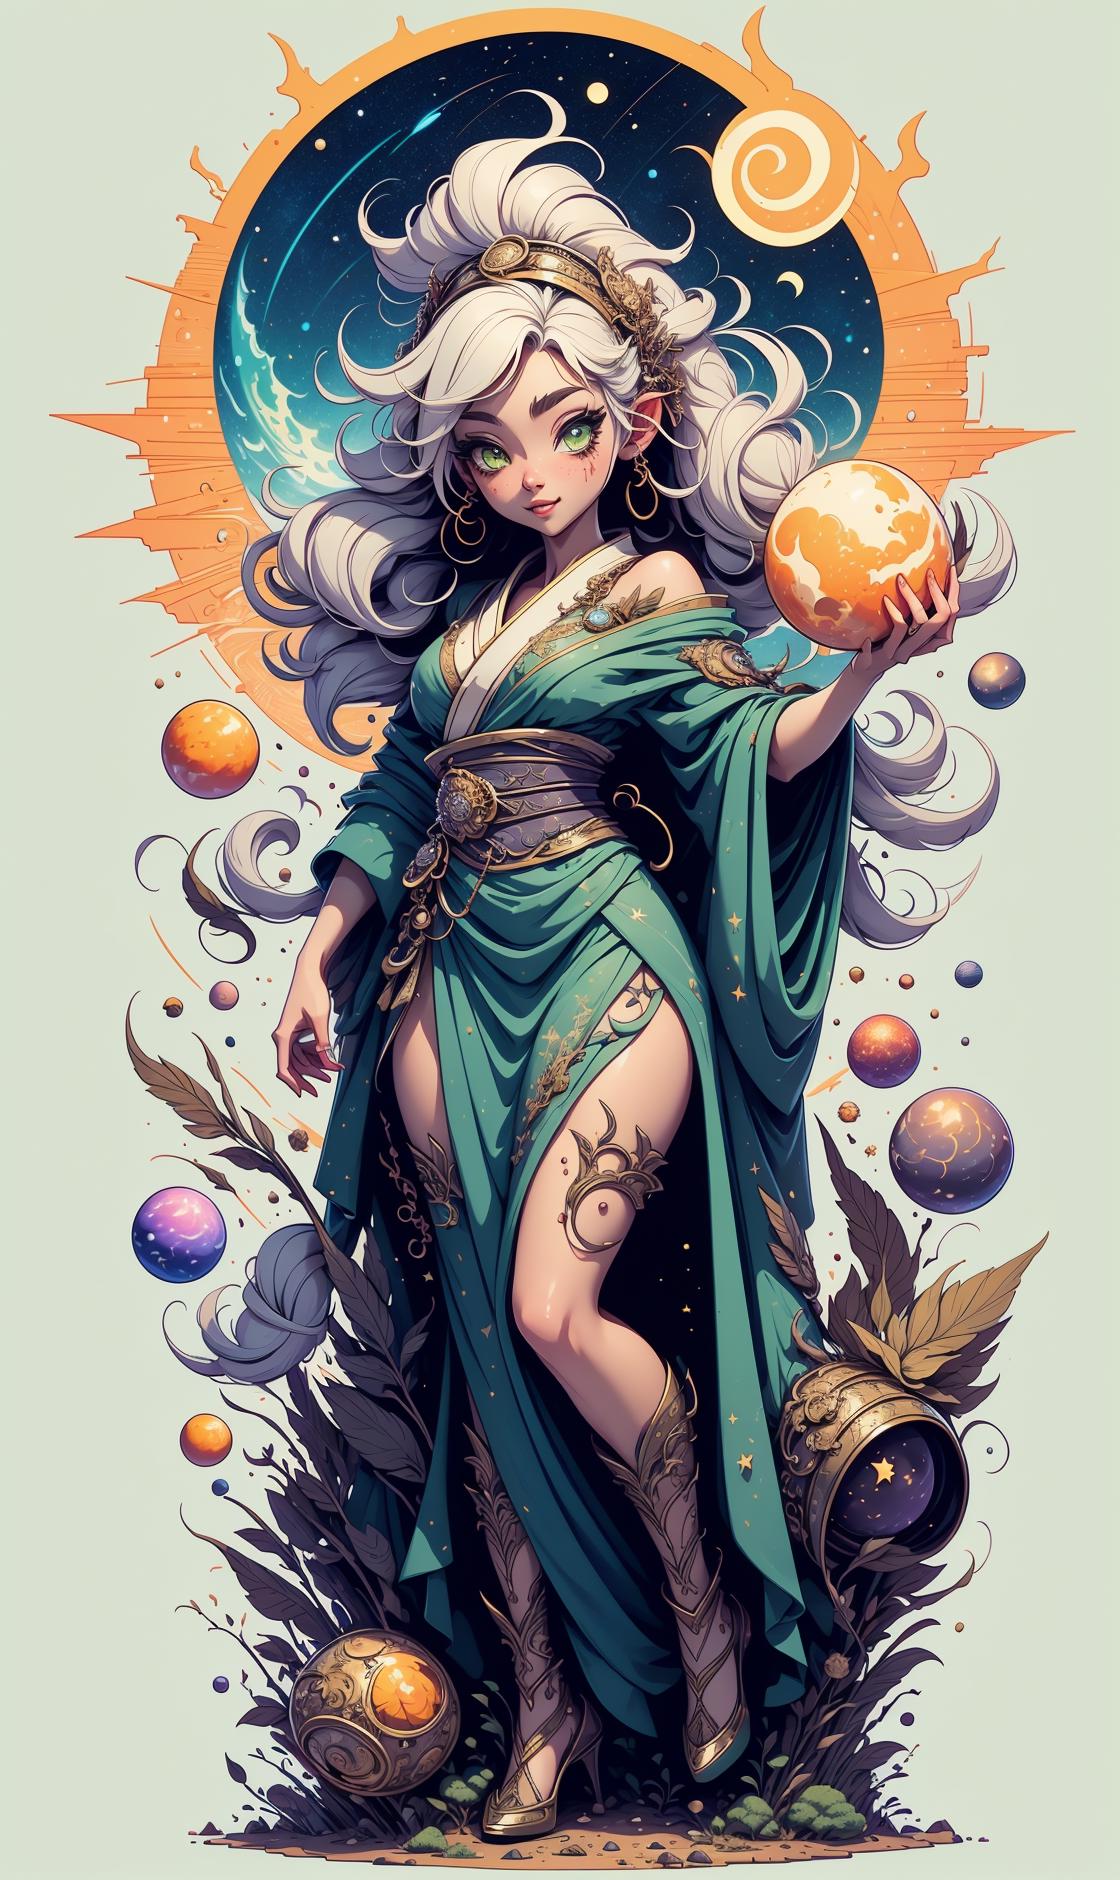 A fantasy art illustration of a woman in a green dress holding a ball.